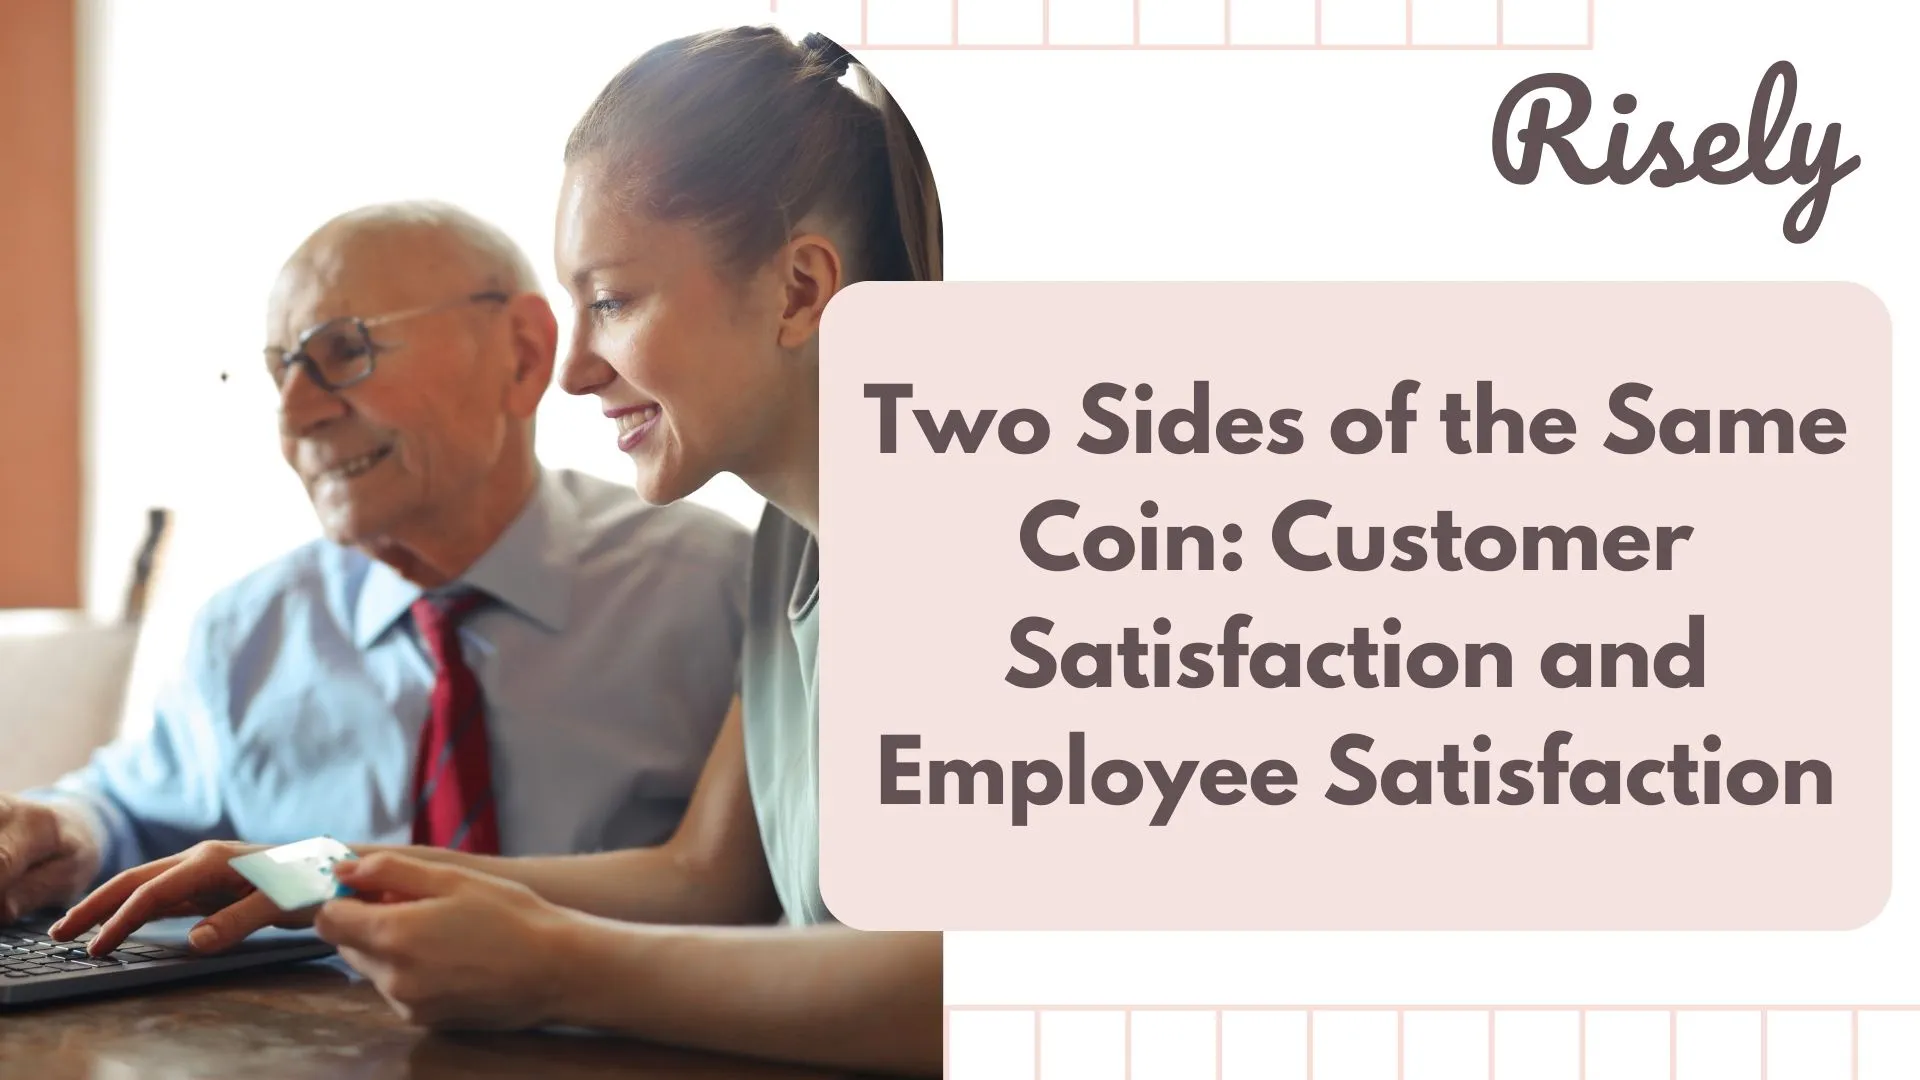 Two Sides of the Same Coin: Customer Satisfaction and Employee Satisfaction